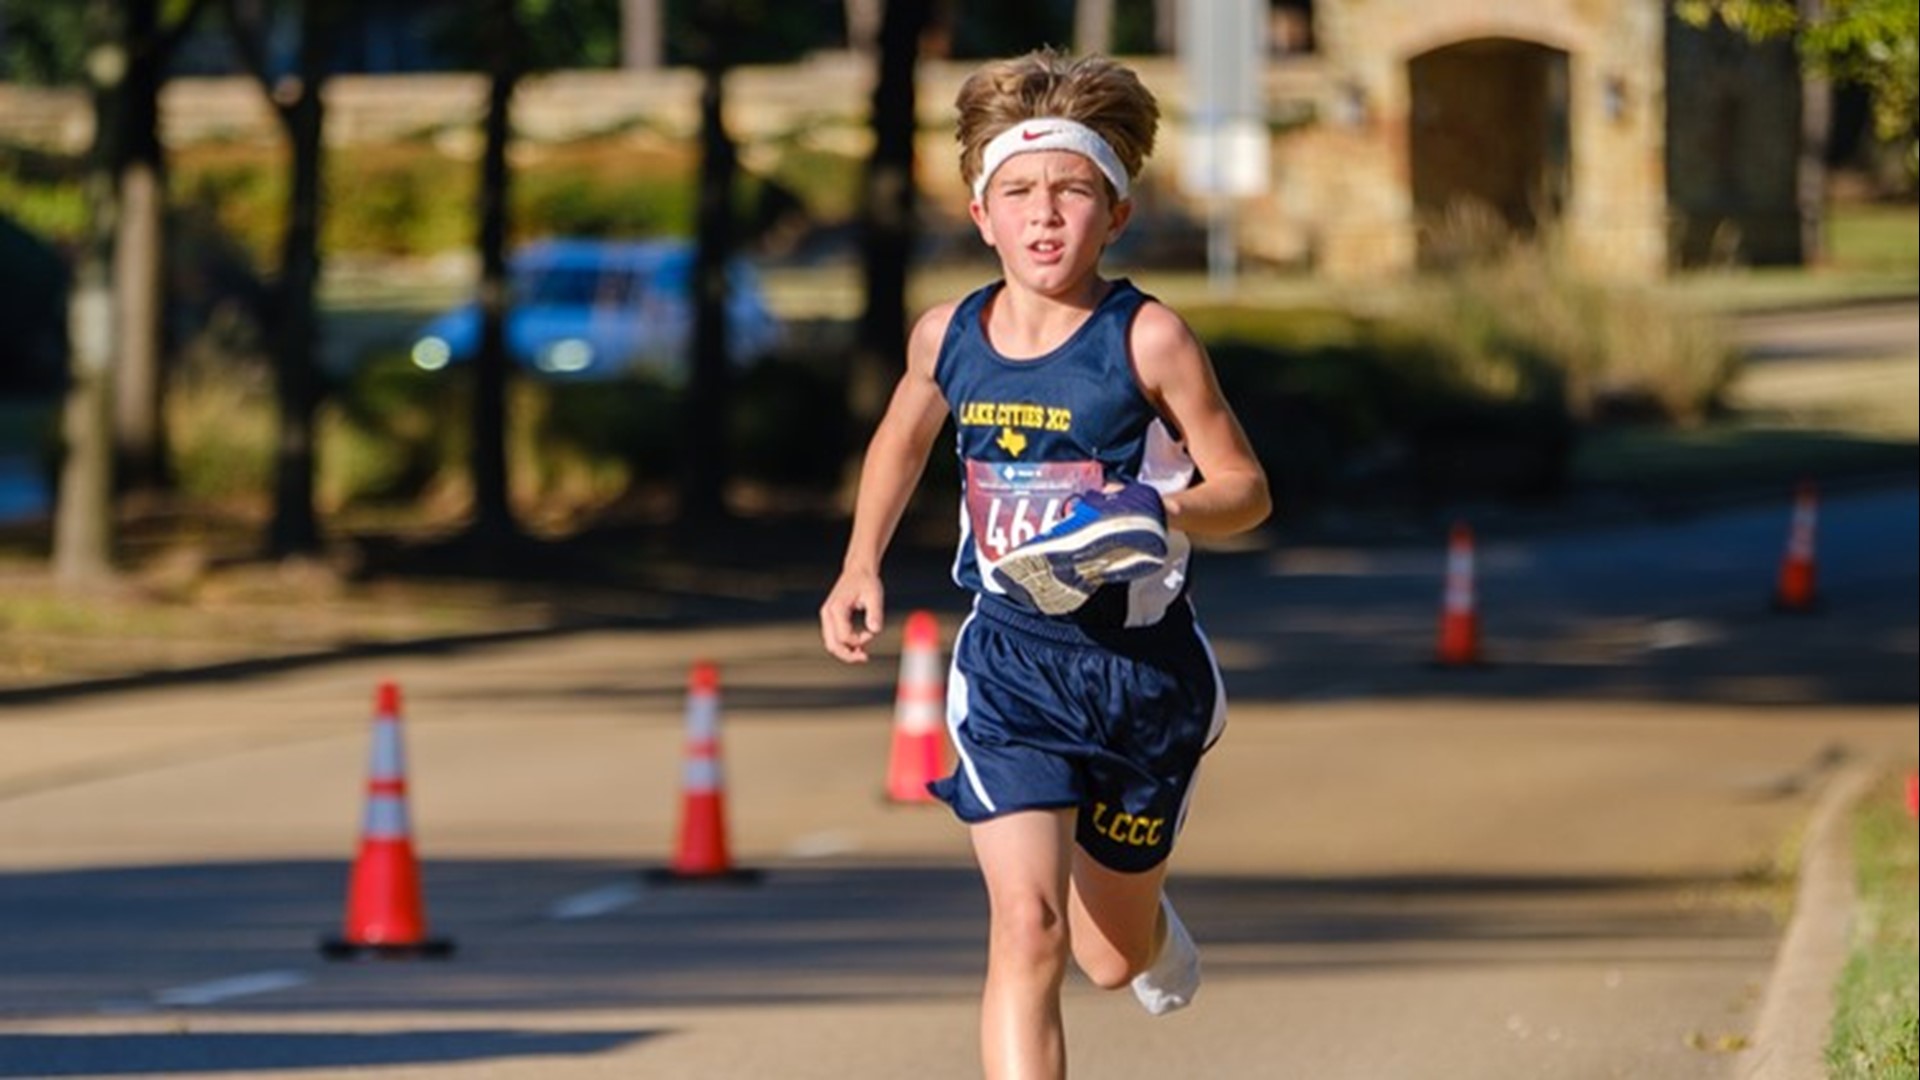 8-year-old runner honors late grandfather with one shoe and 3.1 miles of determination